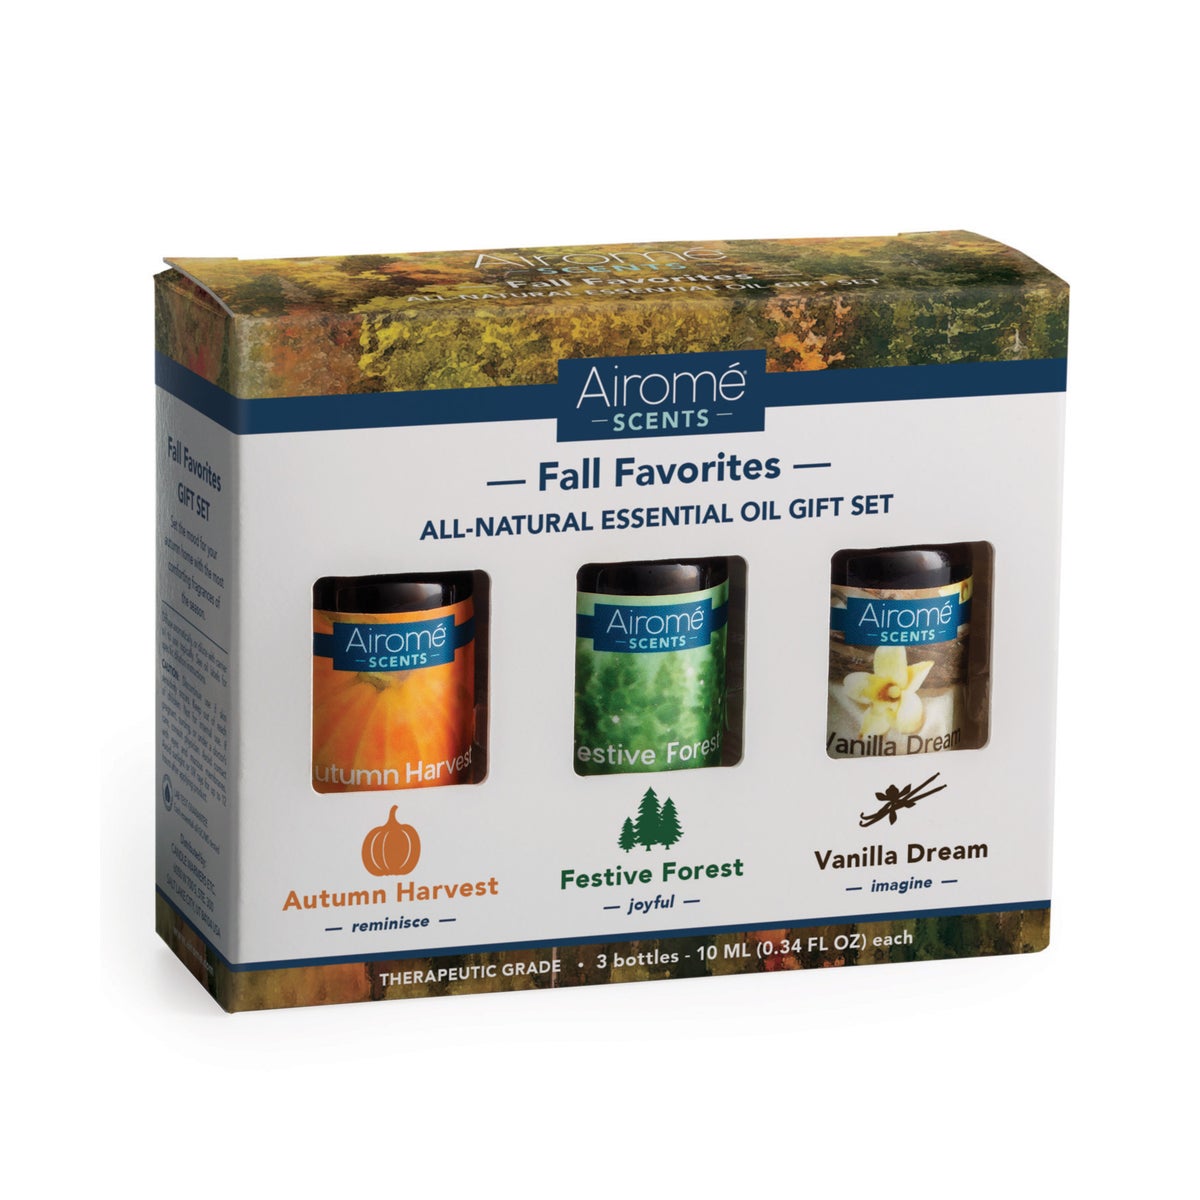 Essential Oils Gift Set - Airome Scents Fall Favorites - Includes Autumn Harvest, Festive Forest and